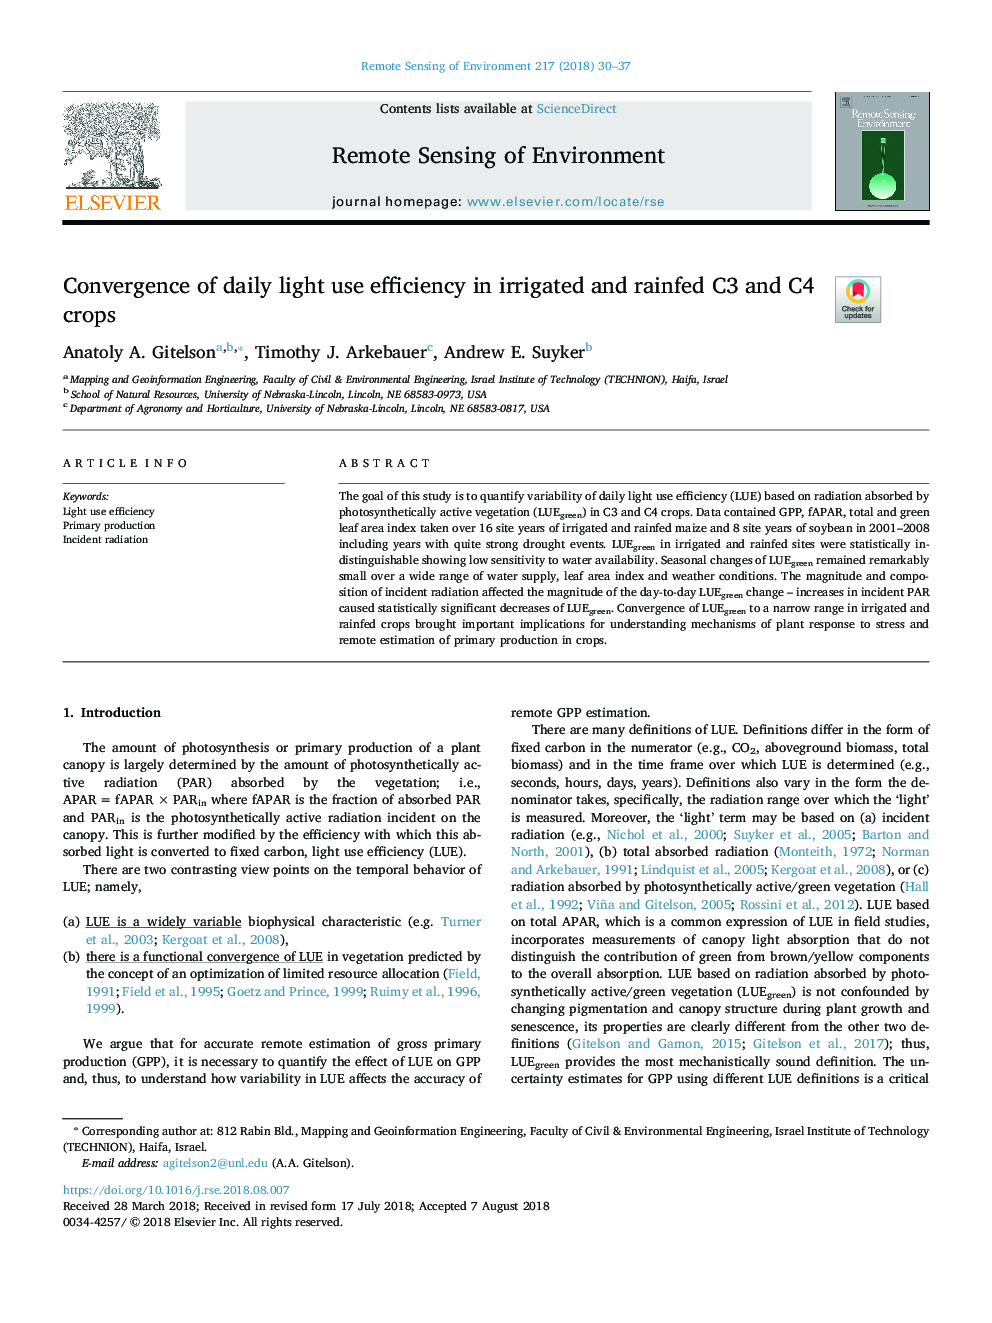 Convergence of daily light use efficiency in irrigated and rainfed C3 and C4 crops